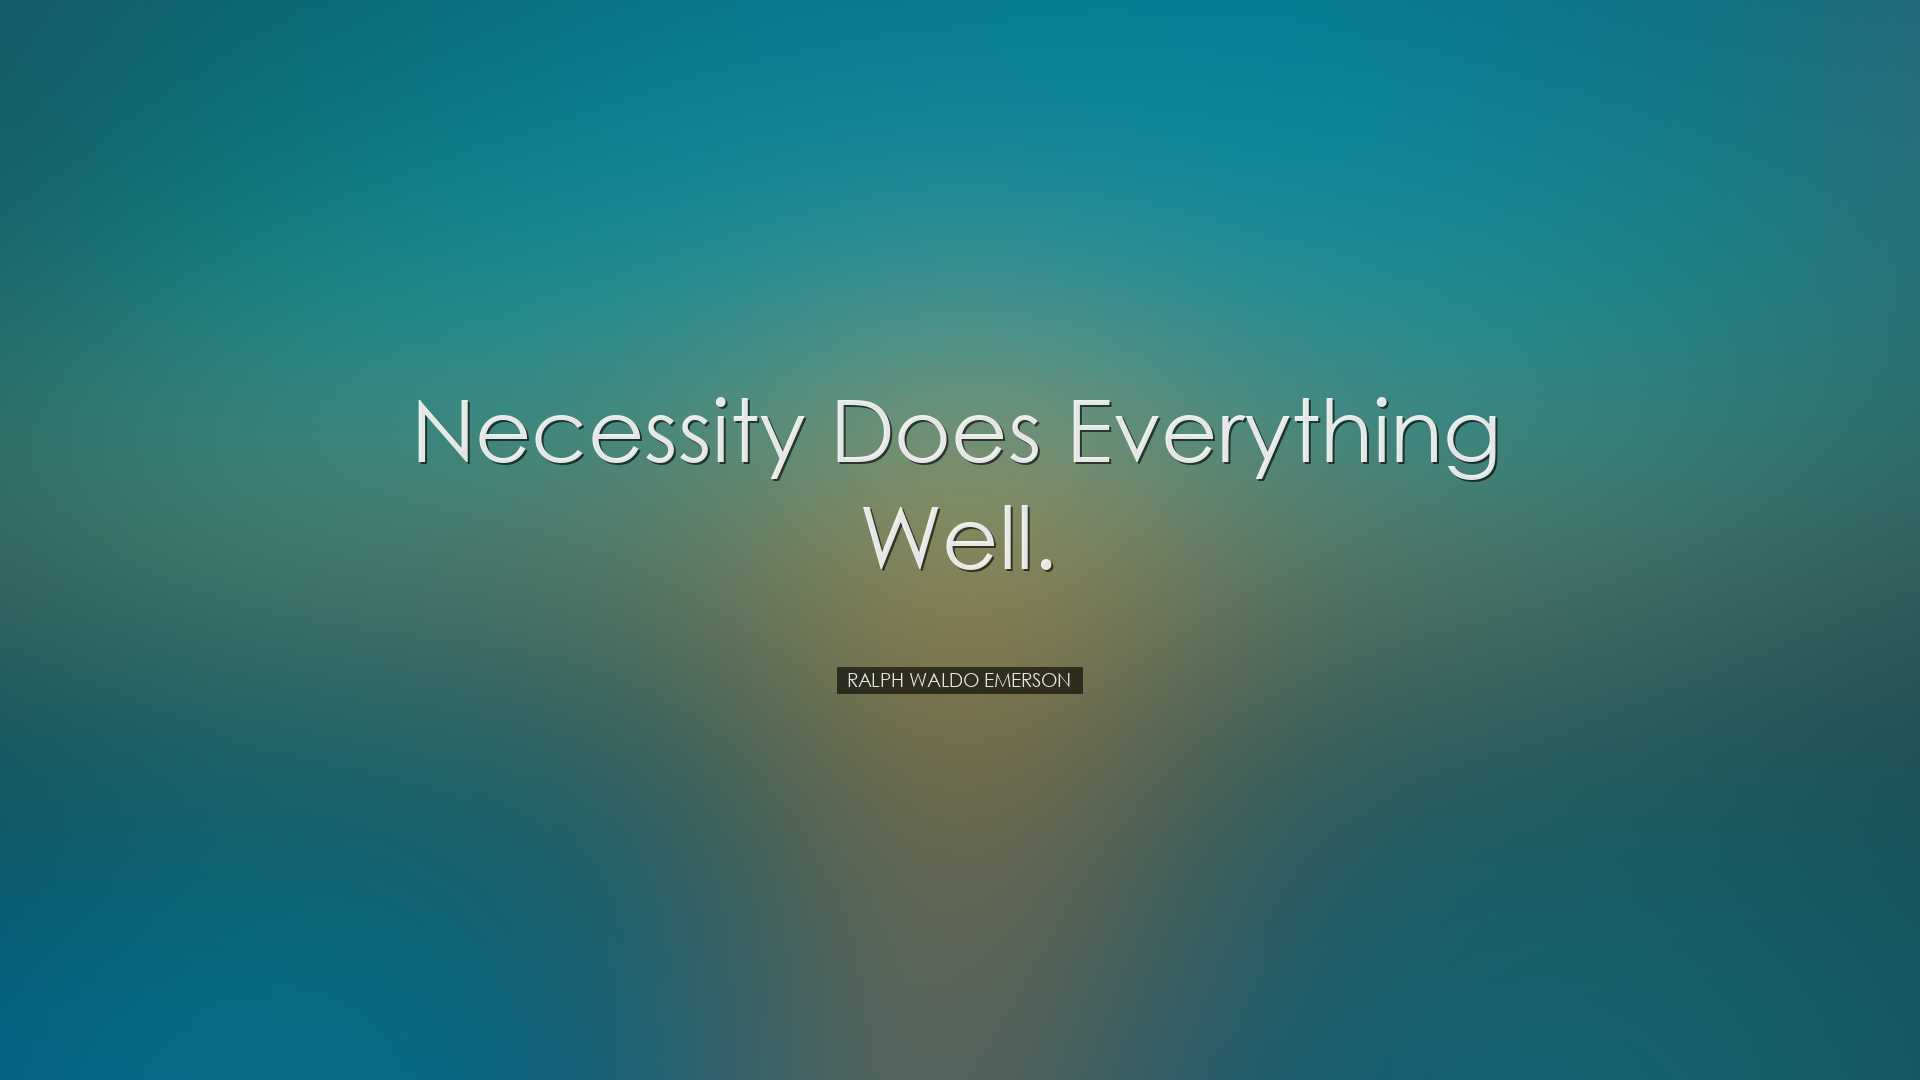 Necessity does everything well. - Ralph Waldo Emerson